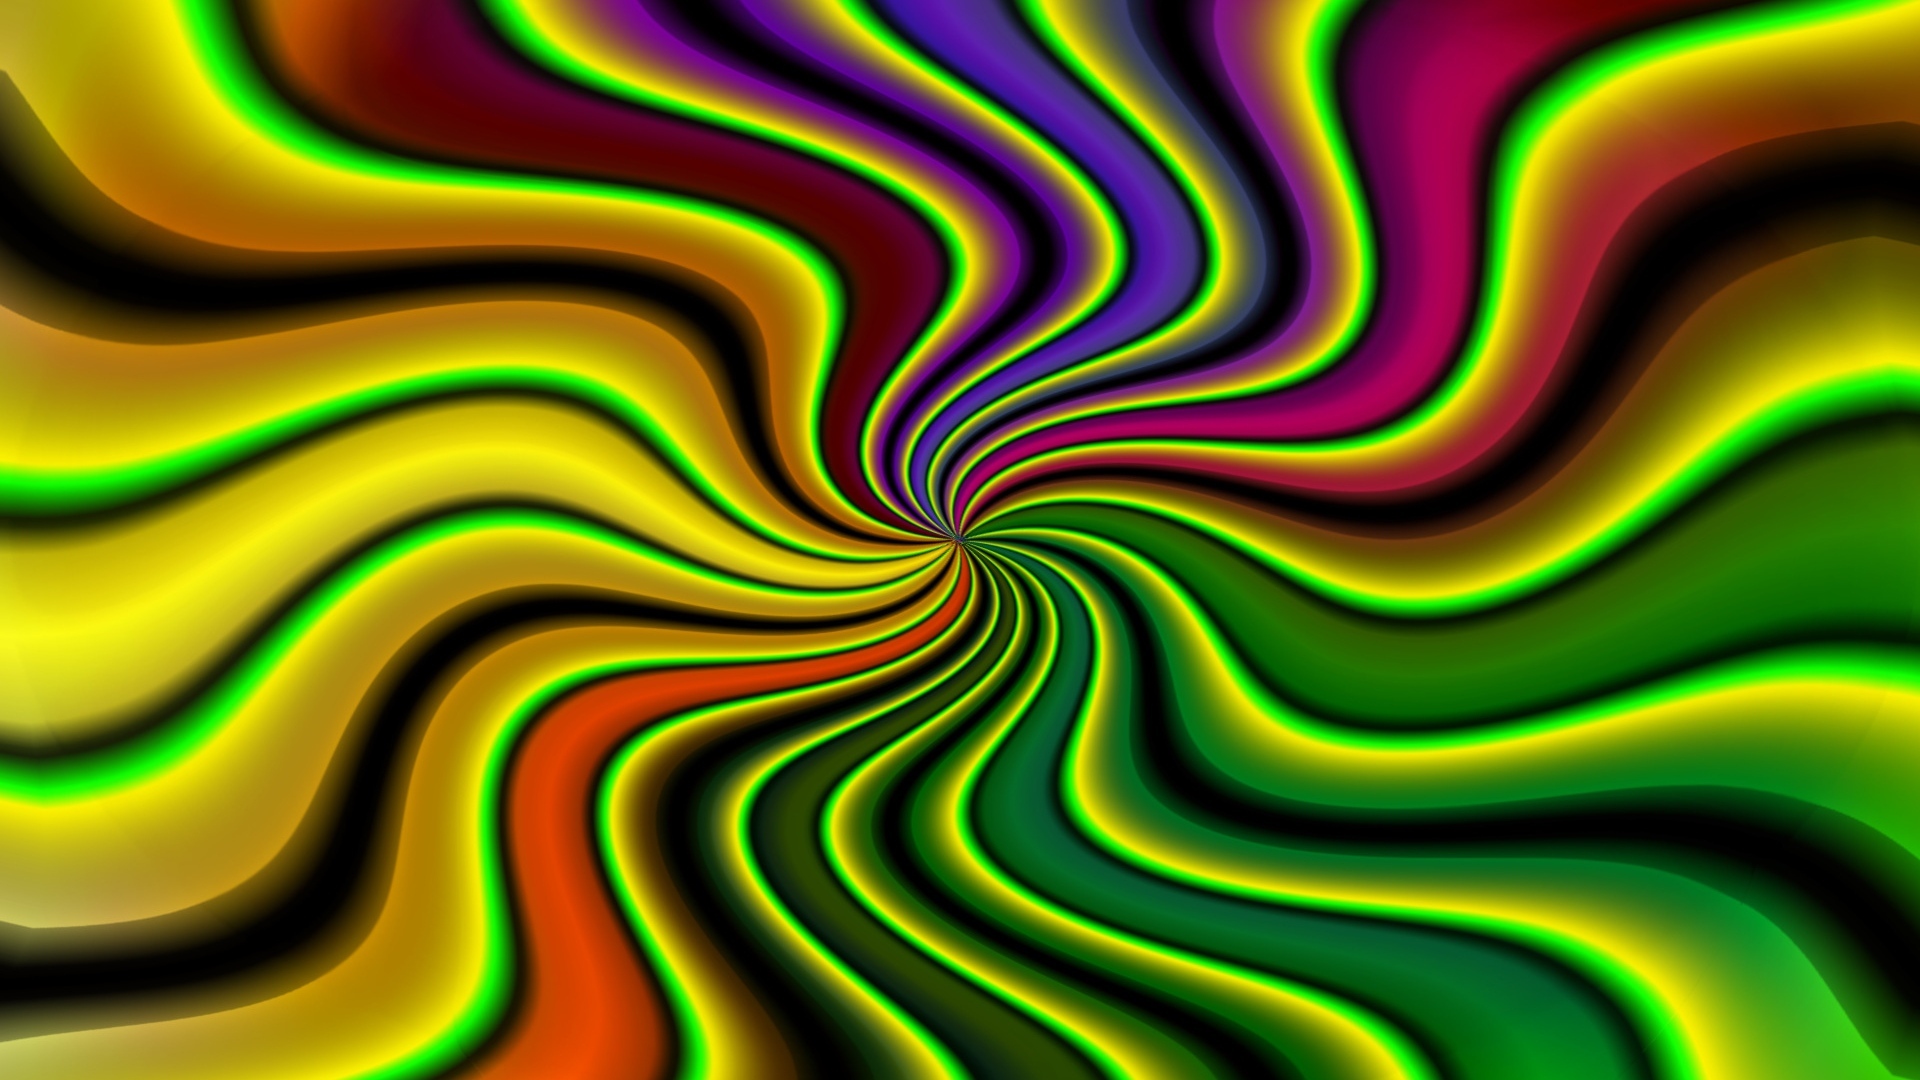 Colorful Optical Illusions - 1920x1080 Wallpaper 